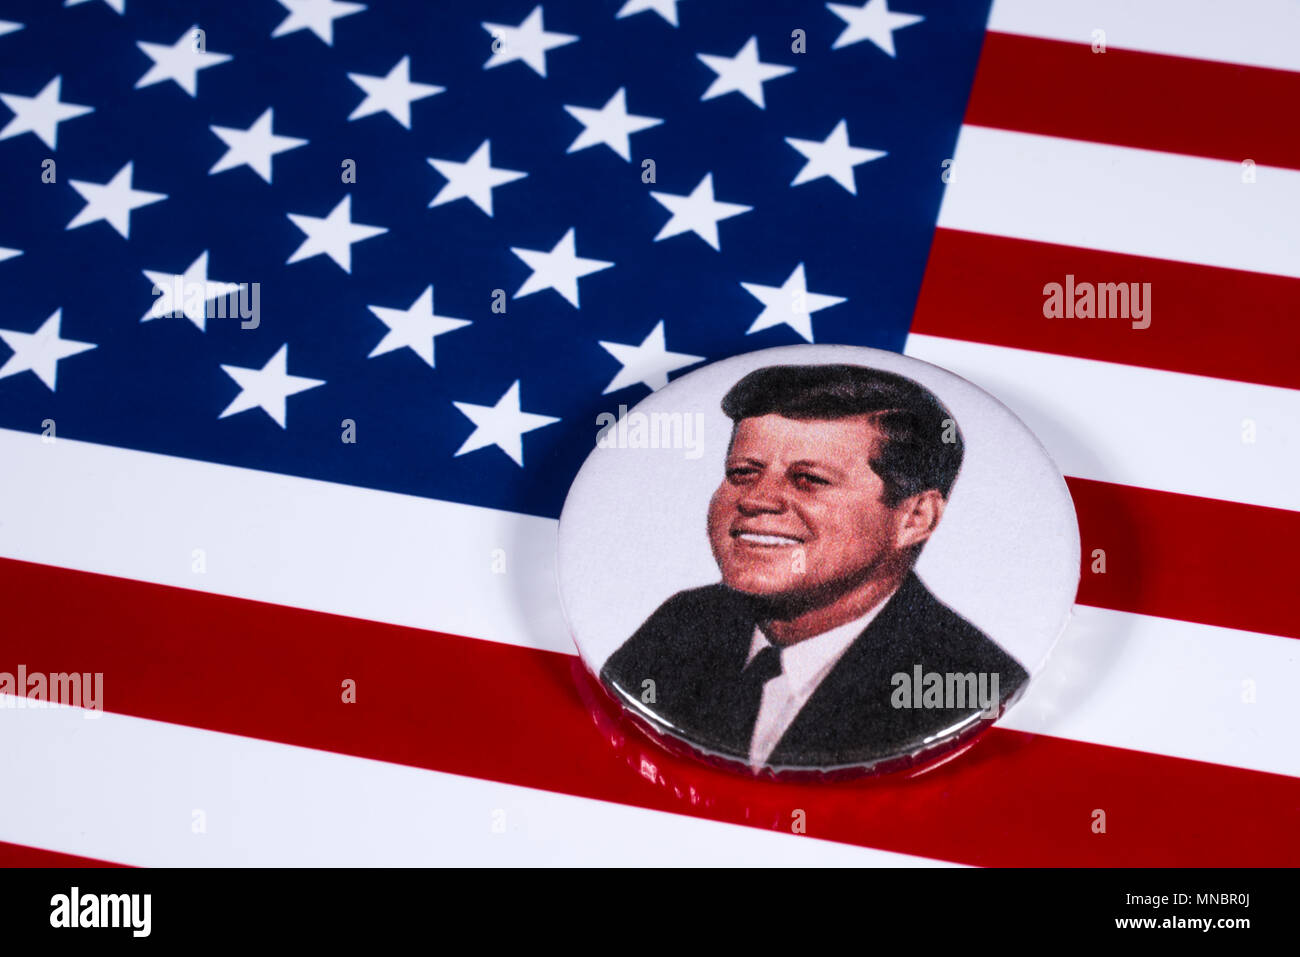 LONDON, UK - APRIL 27TH 2018: A John F. Kennedy badge pictured over the USA Flag, on 27th April 2018.  John F Kennedy was the 35th President of the Un Stock Photo